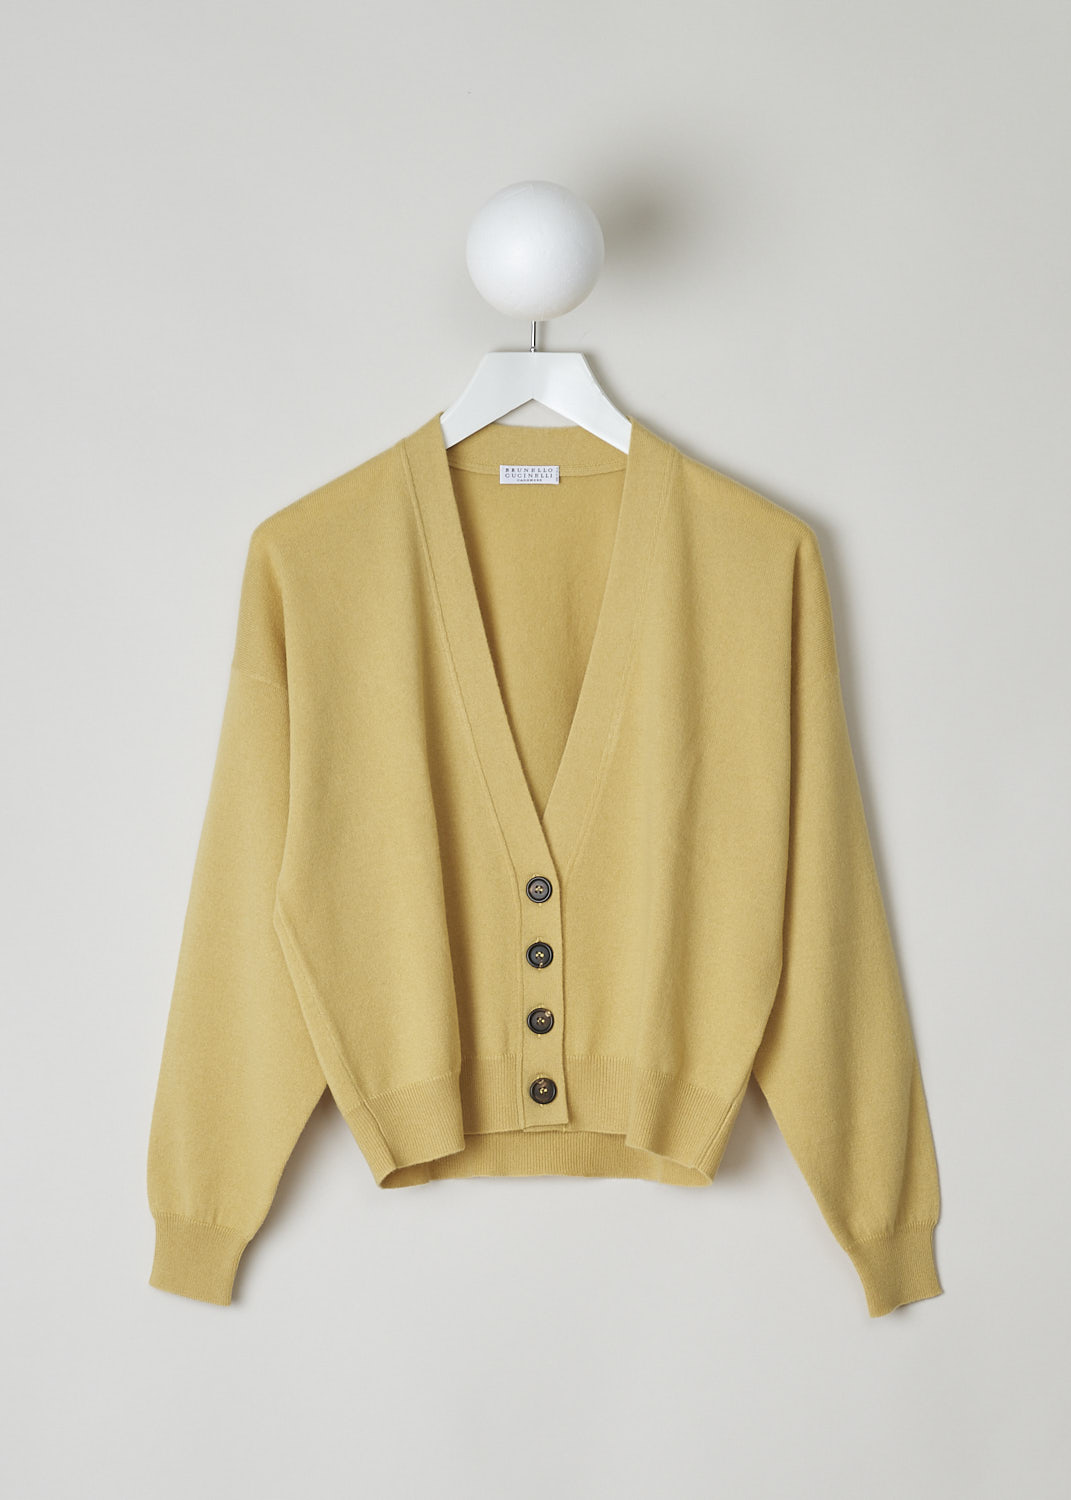 BRUNELLO CUCINELLI, YELLOW V-NECK CARDIGAN, M12170206_C2991,Yellow, Front, Yellow cardigan with a subtle monilli beaded trim in the back of the neck. The cardigan has a V-neckline, front button closure with tortoise shell buttons and a ribbed hemline and cuffs. The cardigan has a cropped length. 
